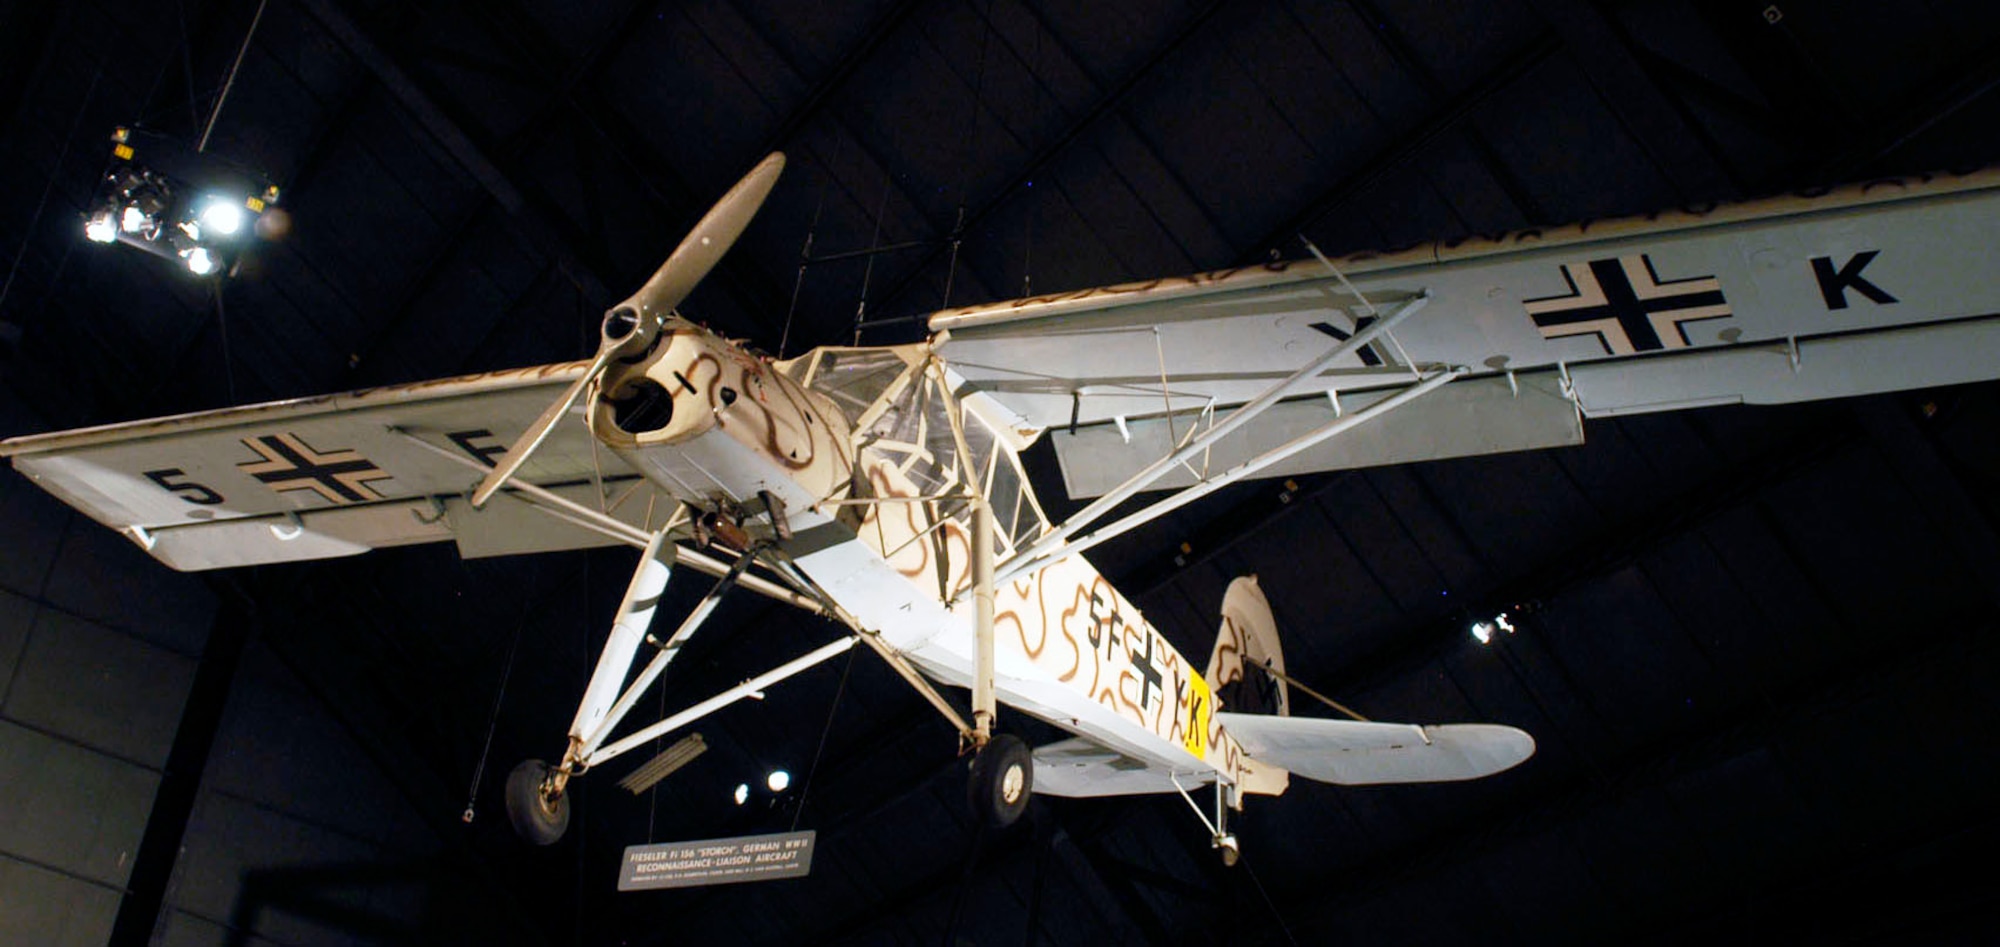 DAYTON, Ohio -- Fieseler Fi-156C-1 Storch in the World War II Gallery at the National Museum of the United States Air Force. (U.S. Air Force photo)